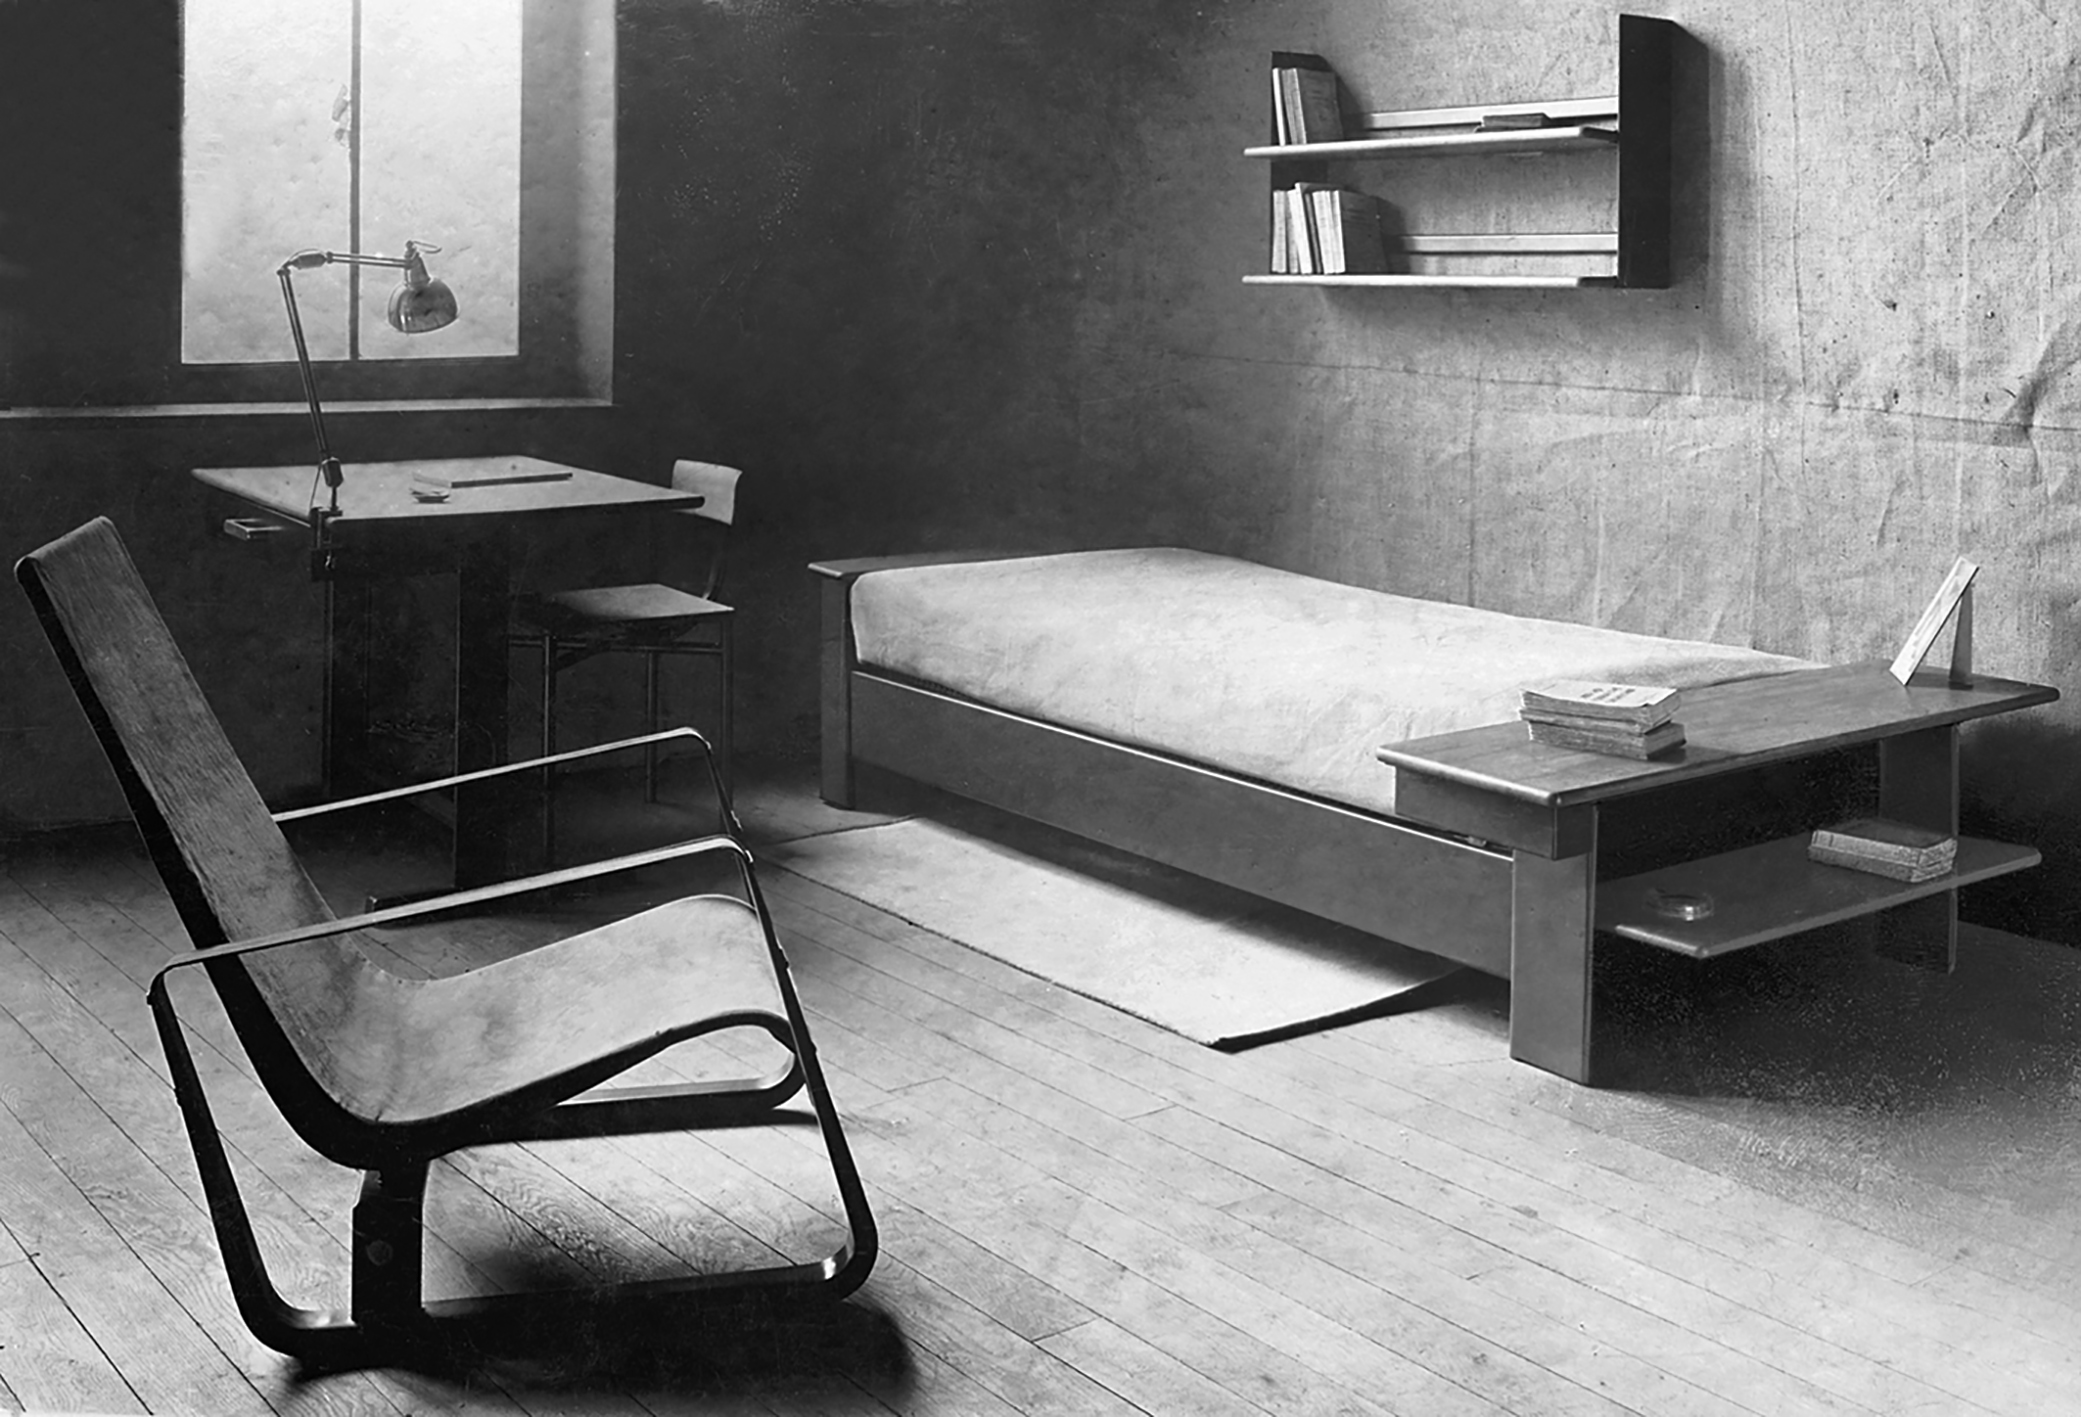 Prototype of a dormitory room presented for the competition for the furnishings of the Cité Universitaire in Nancy, ca. 1930: Cité armchair, bed, shelf, table and chair.